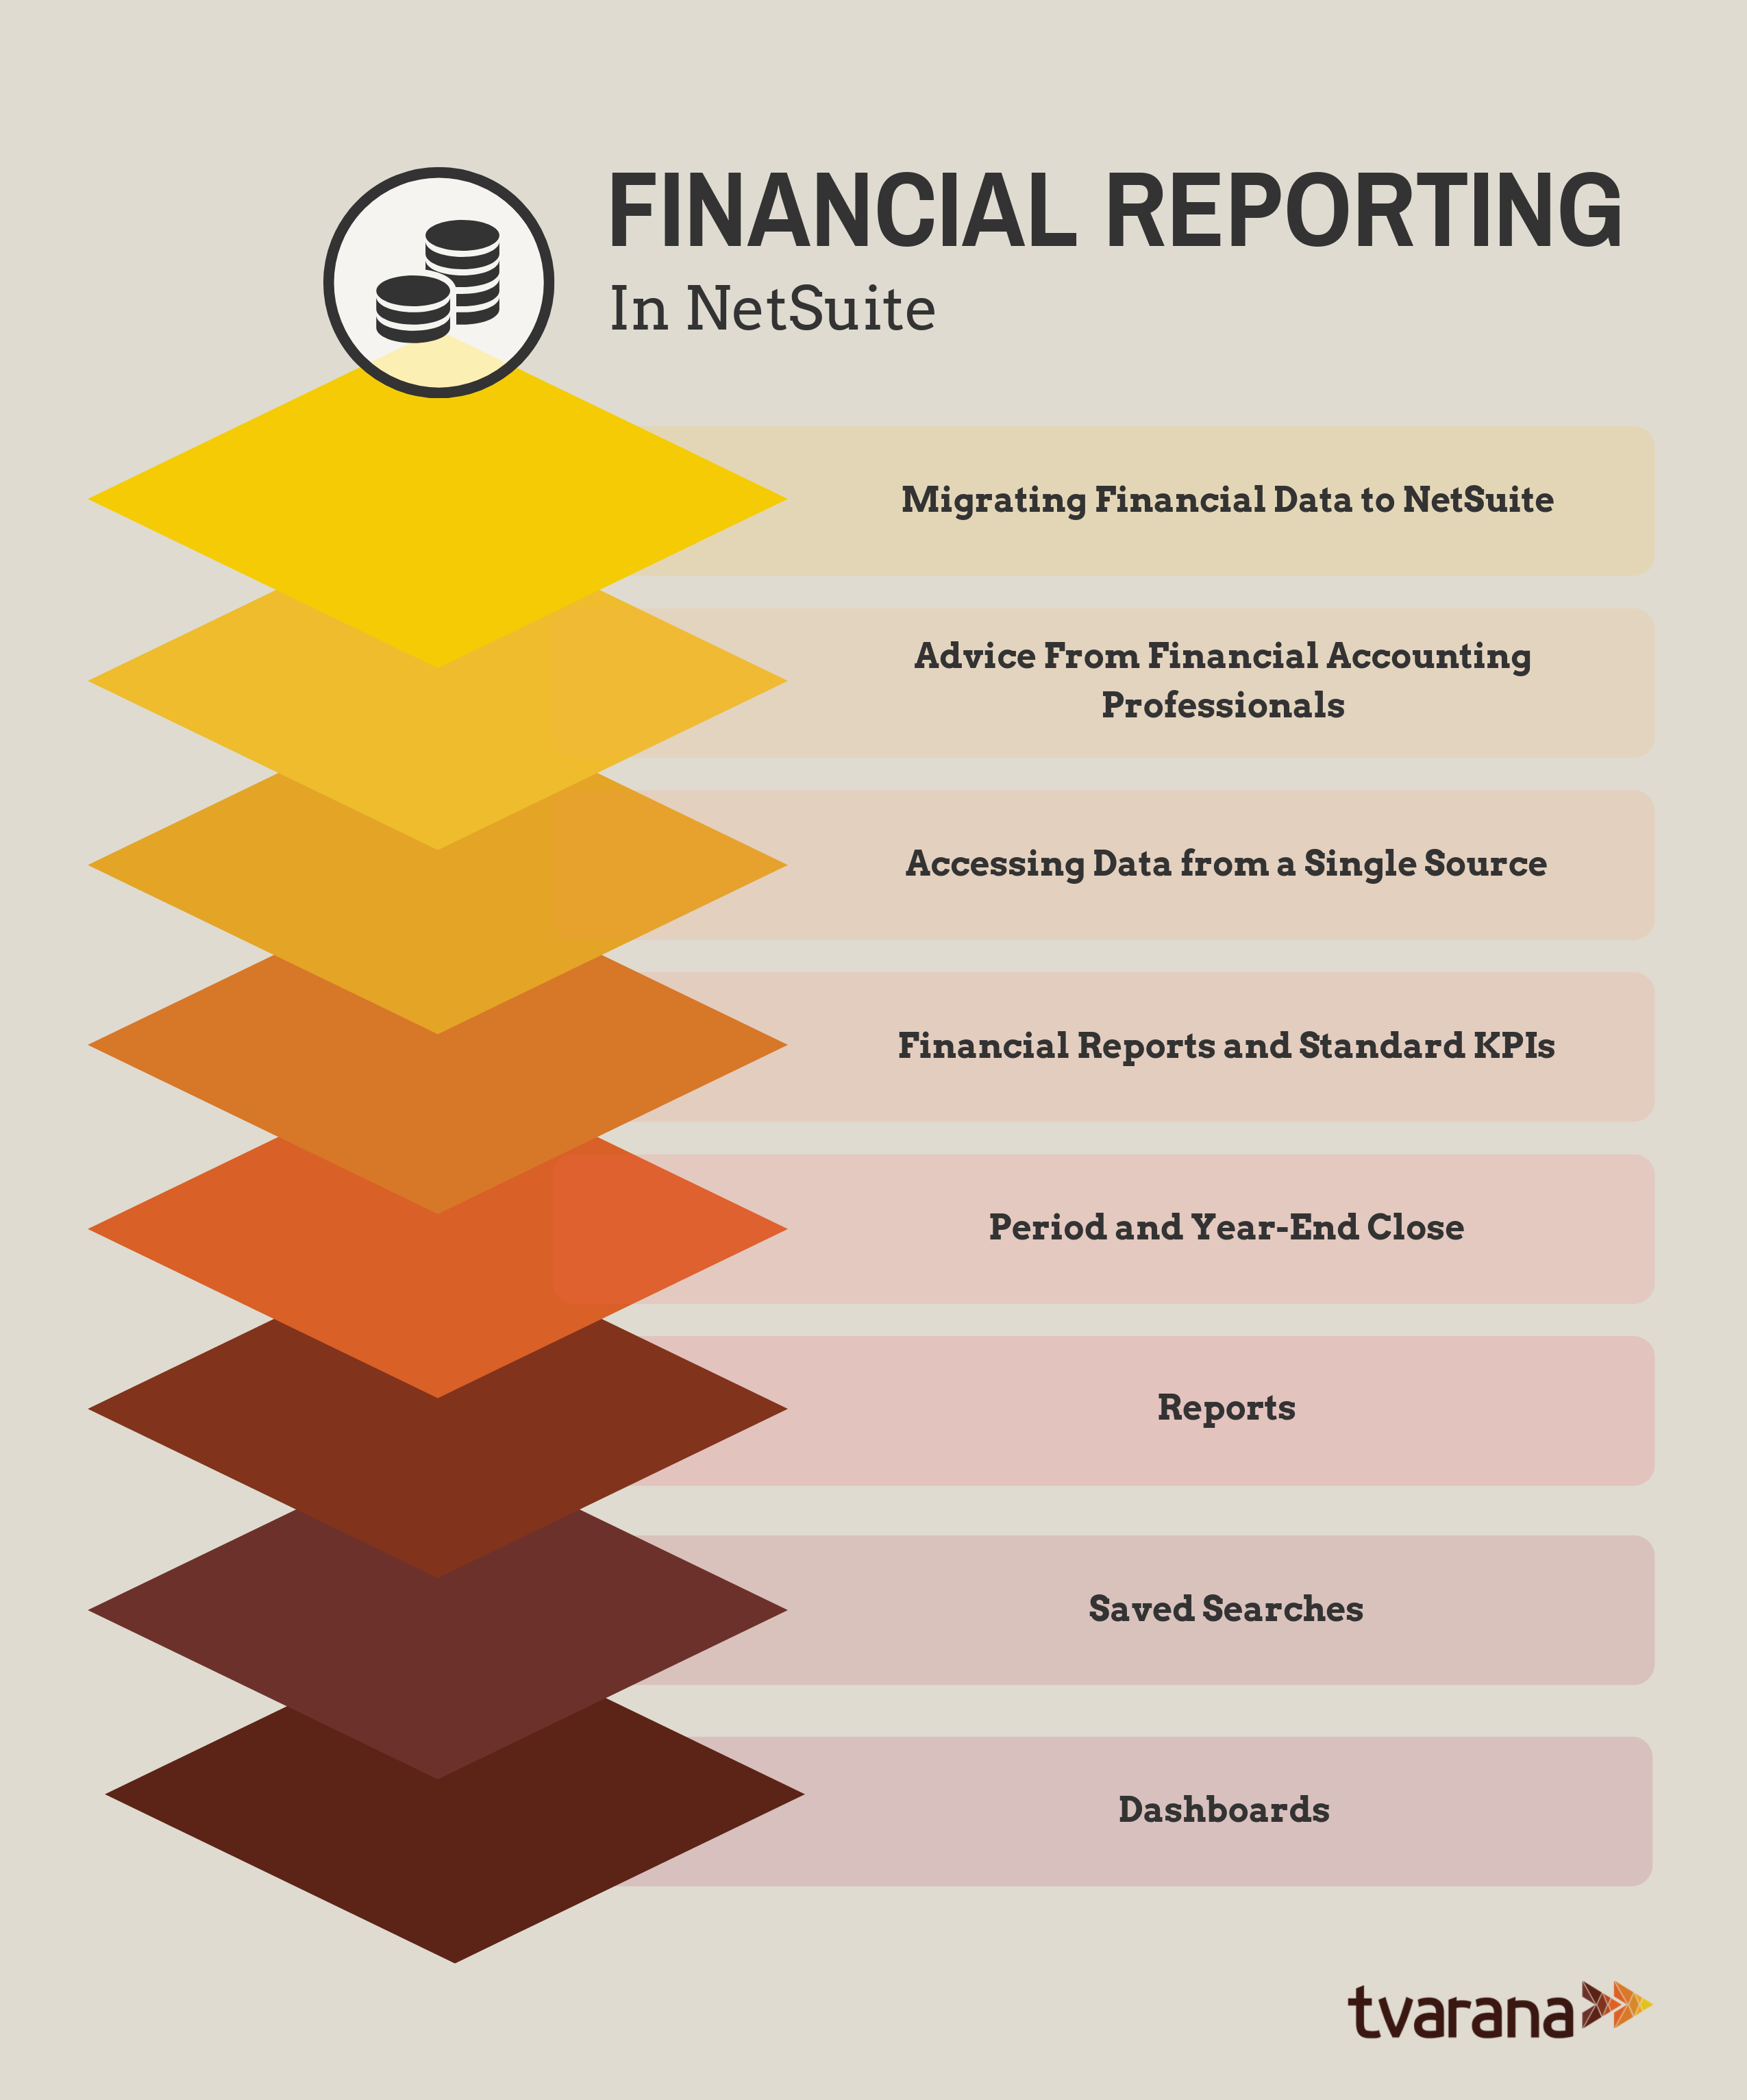 Financial Reporting in netSuite